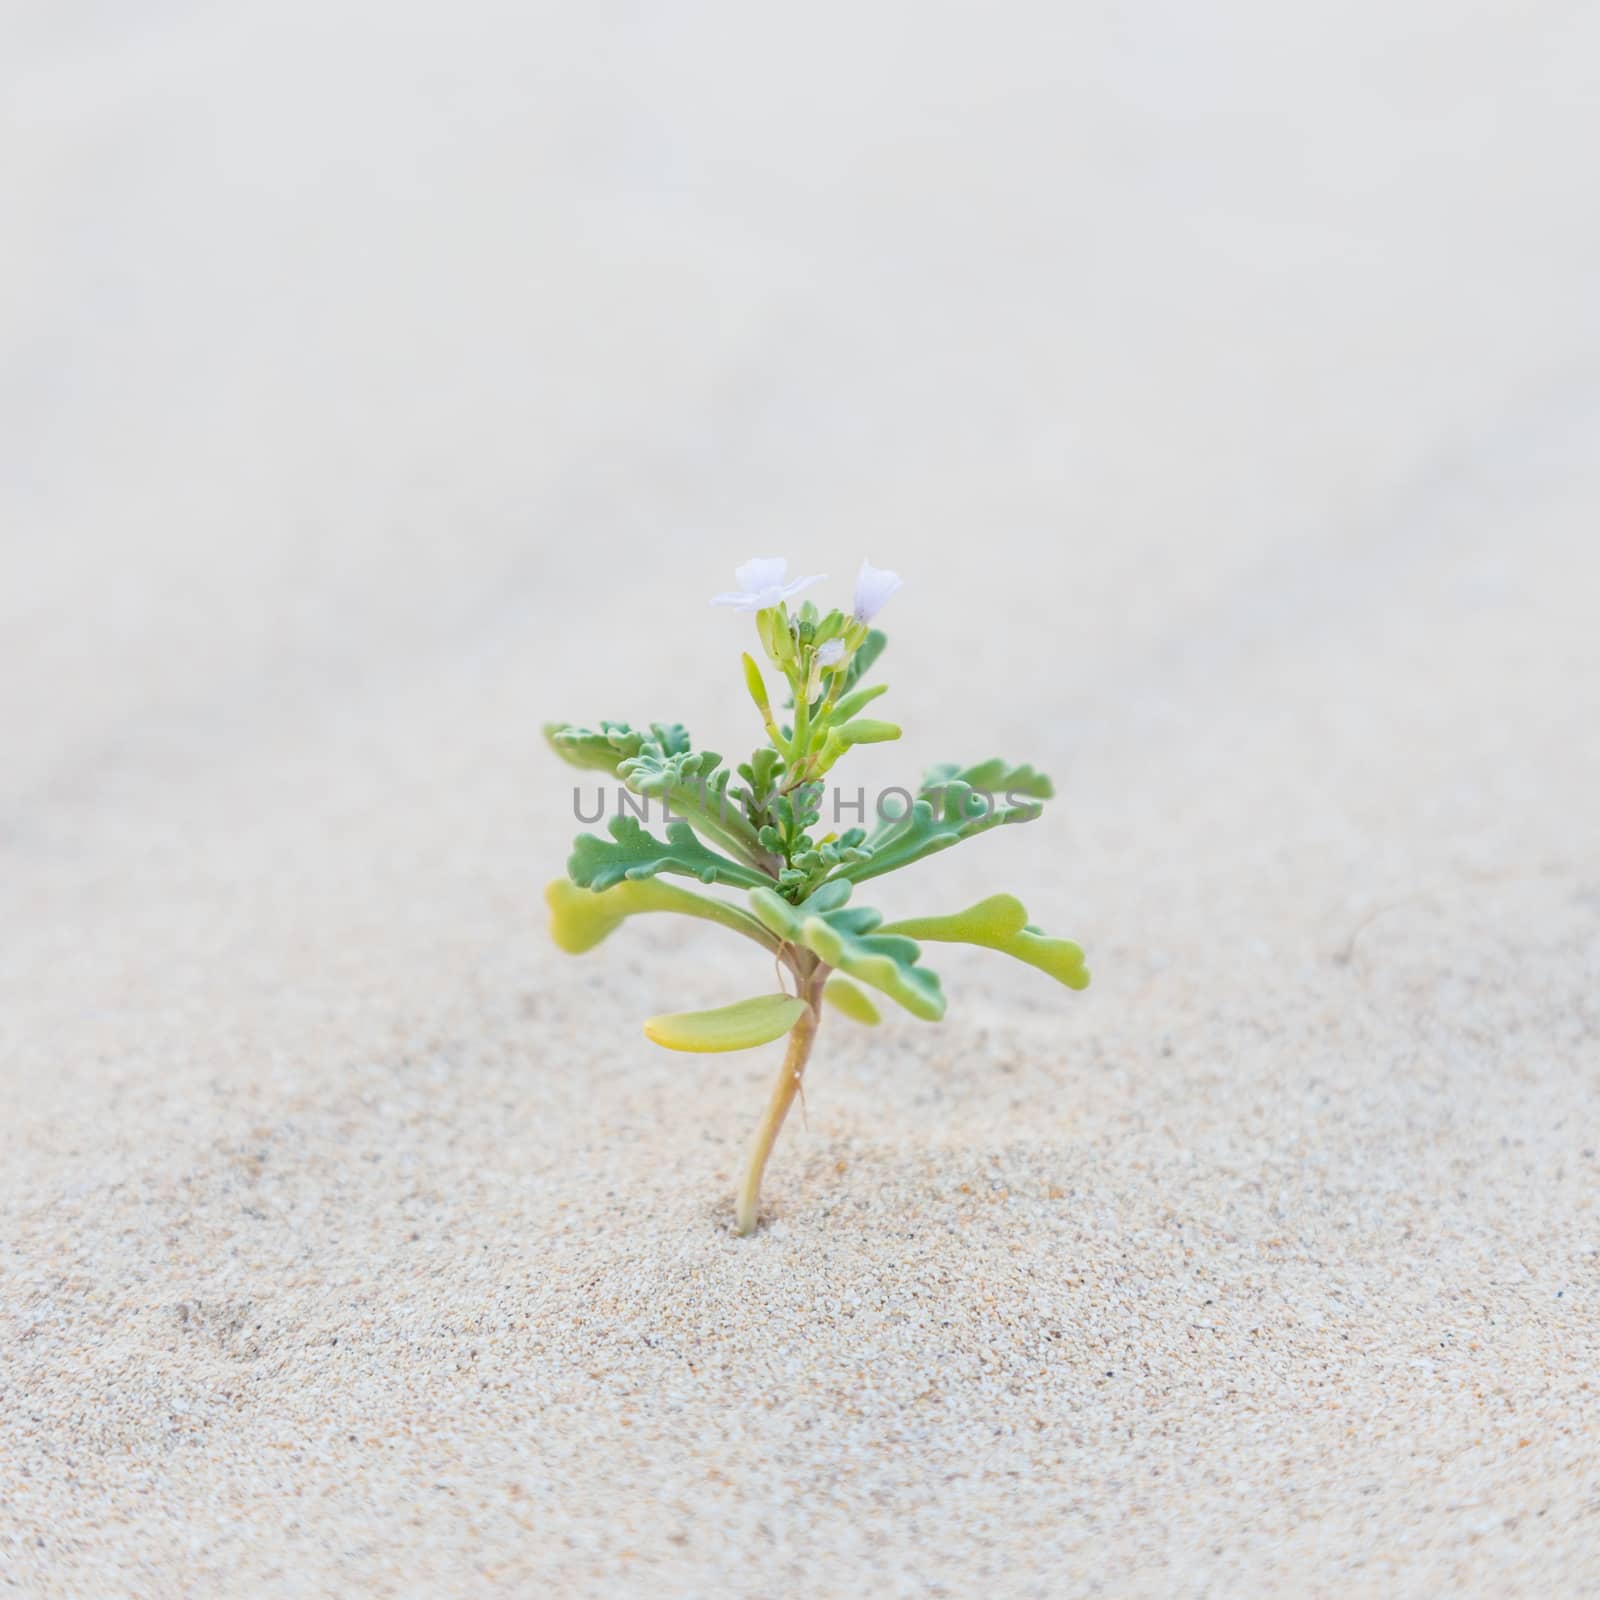 Single sprout blooming in desert sands. by kasto